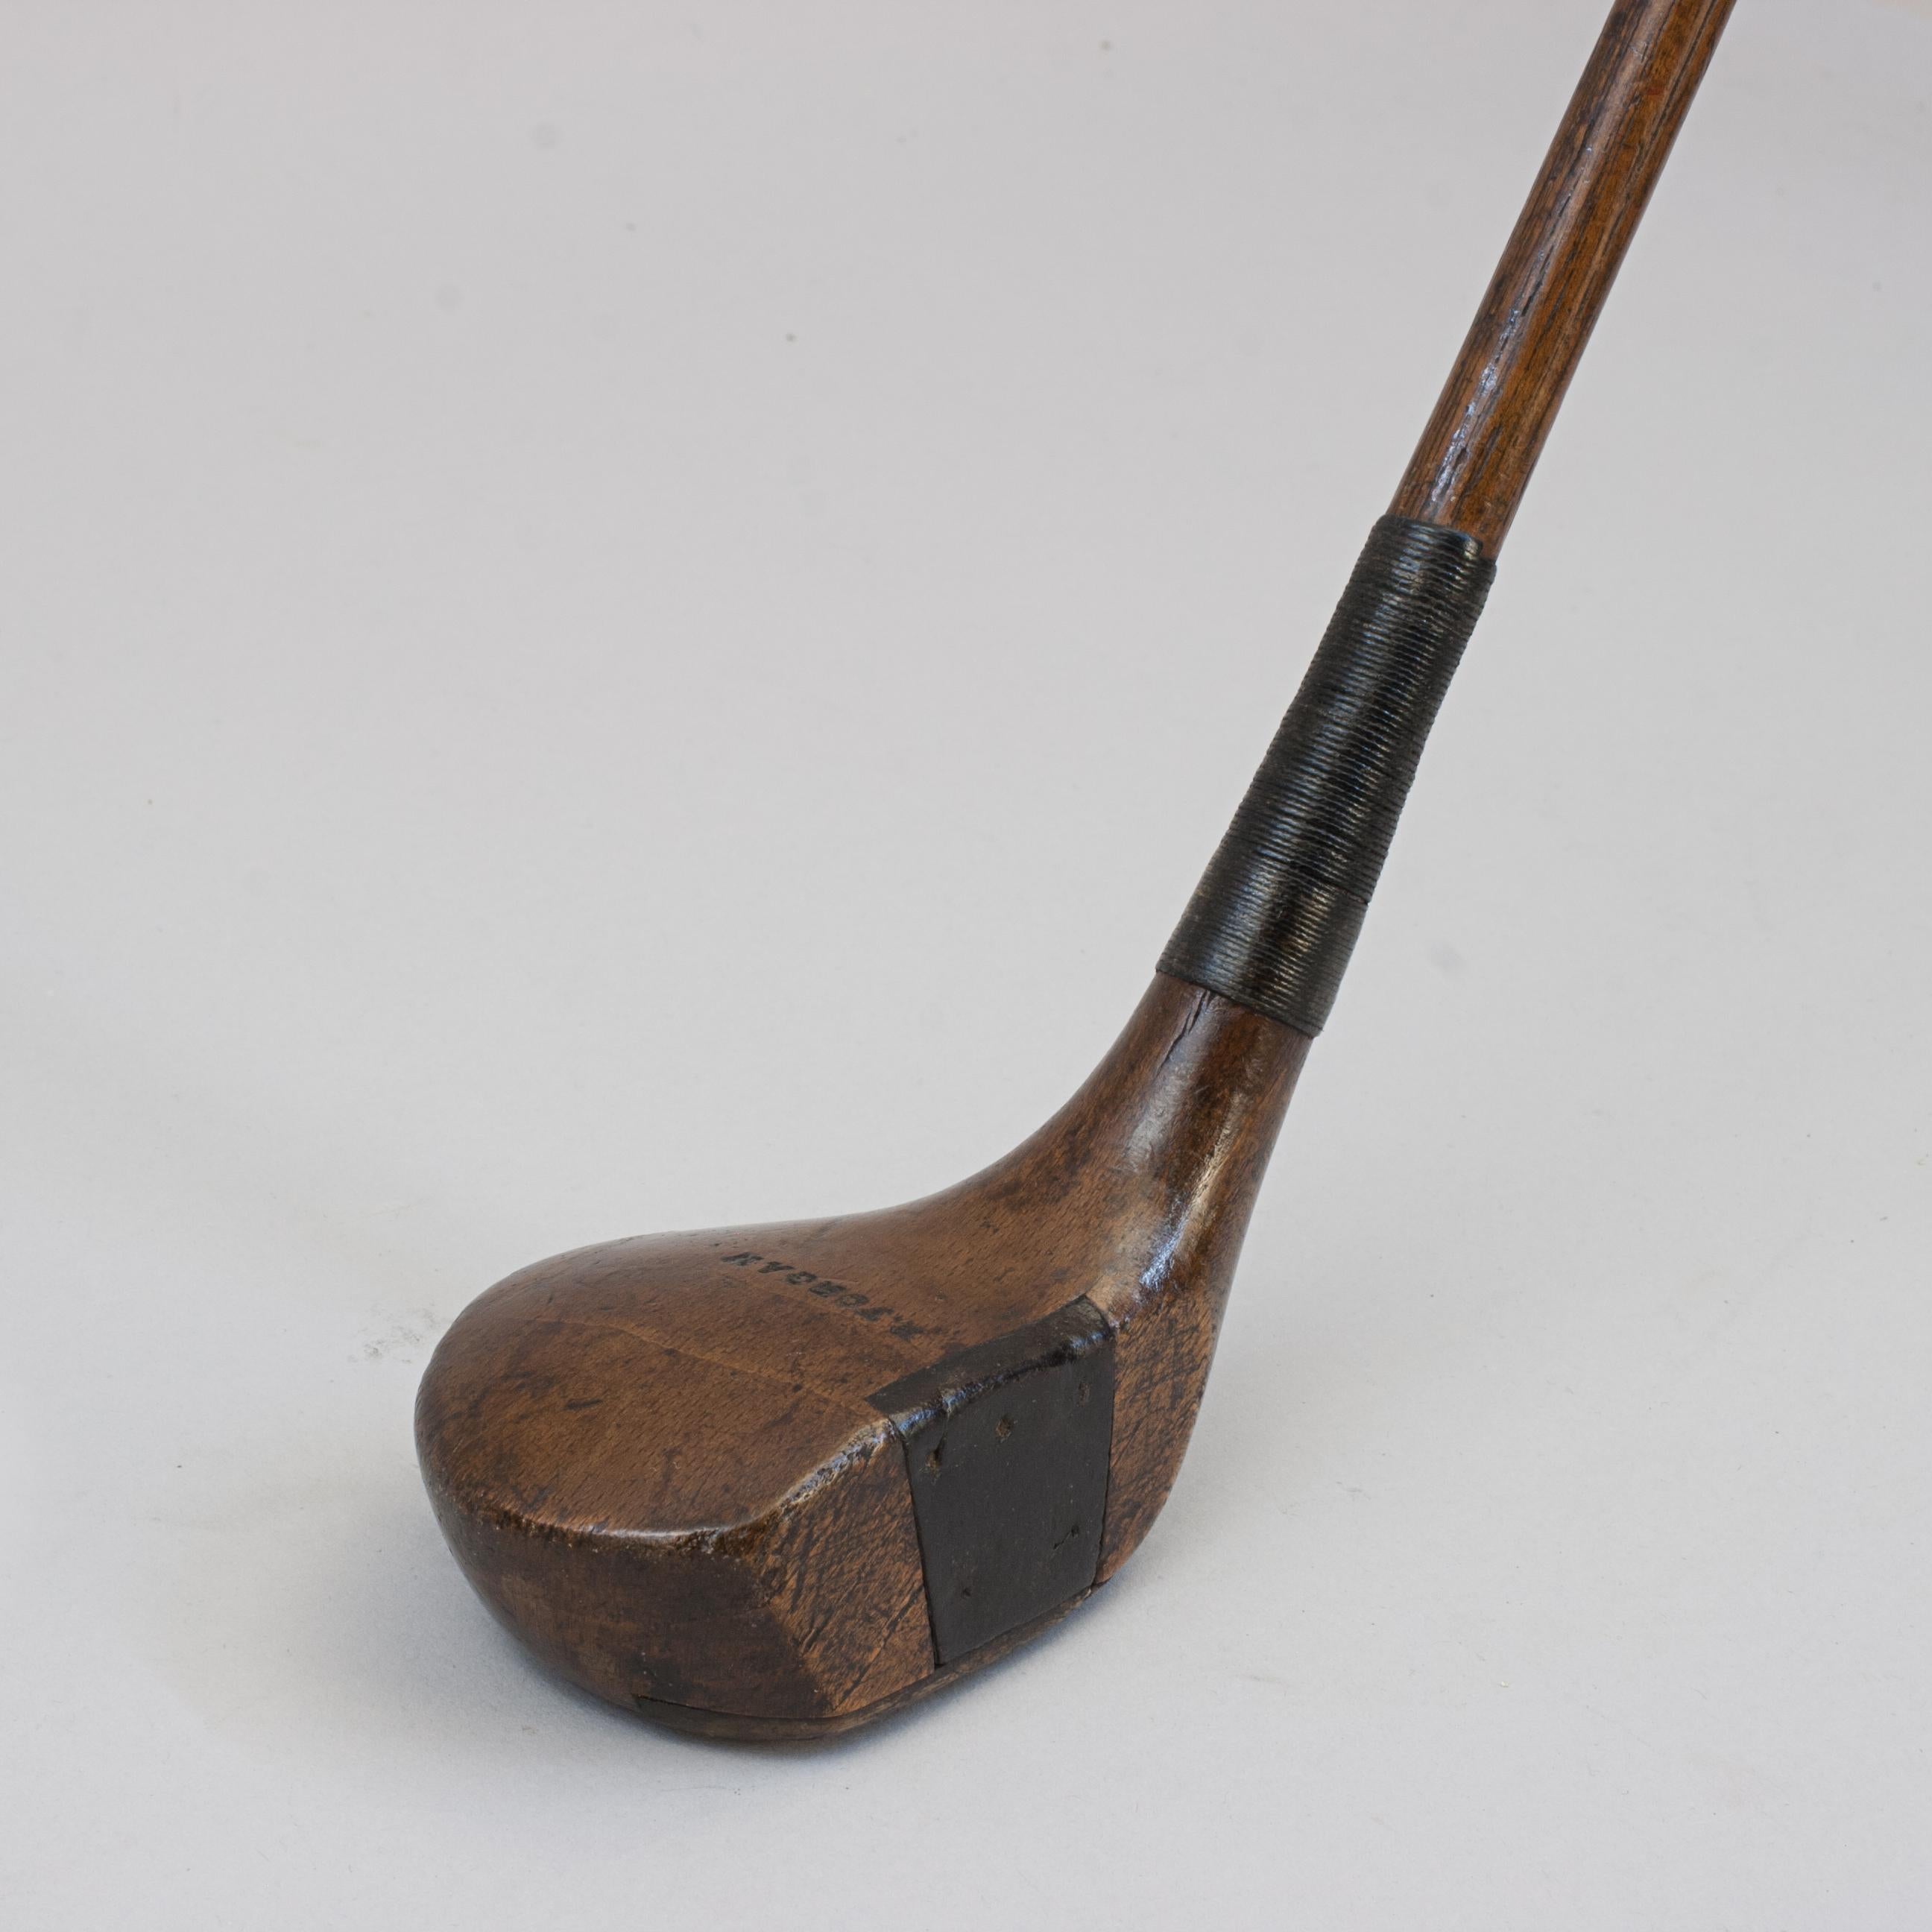 Scottish Persimmon Wood Small Head Golf Club, Driver by R. Forgan For Sale